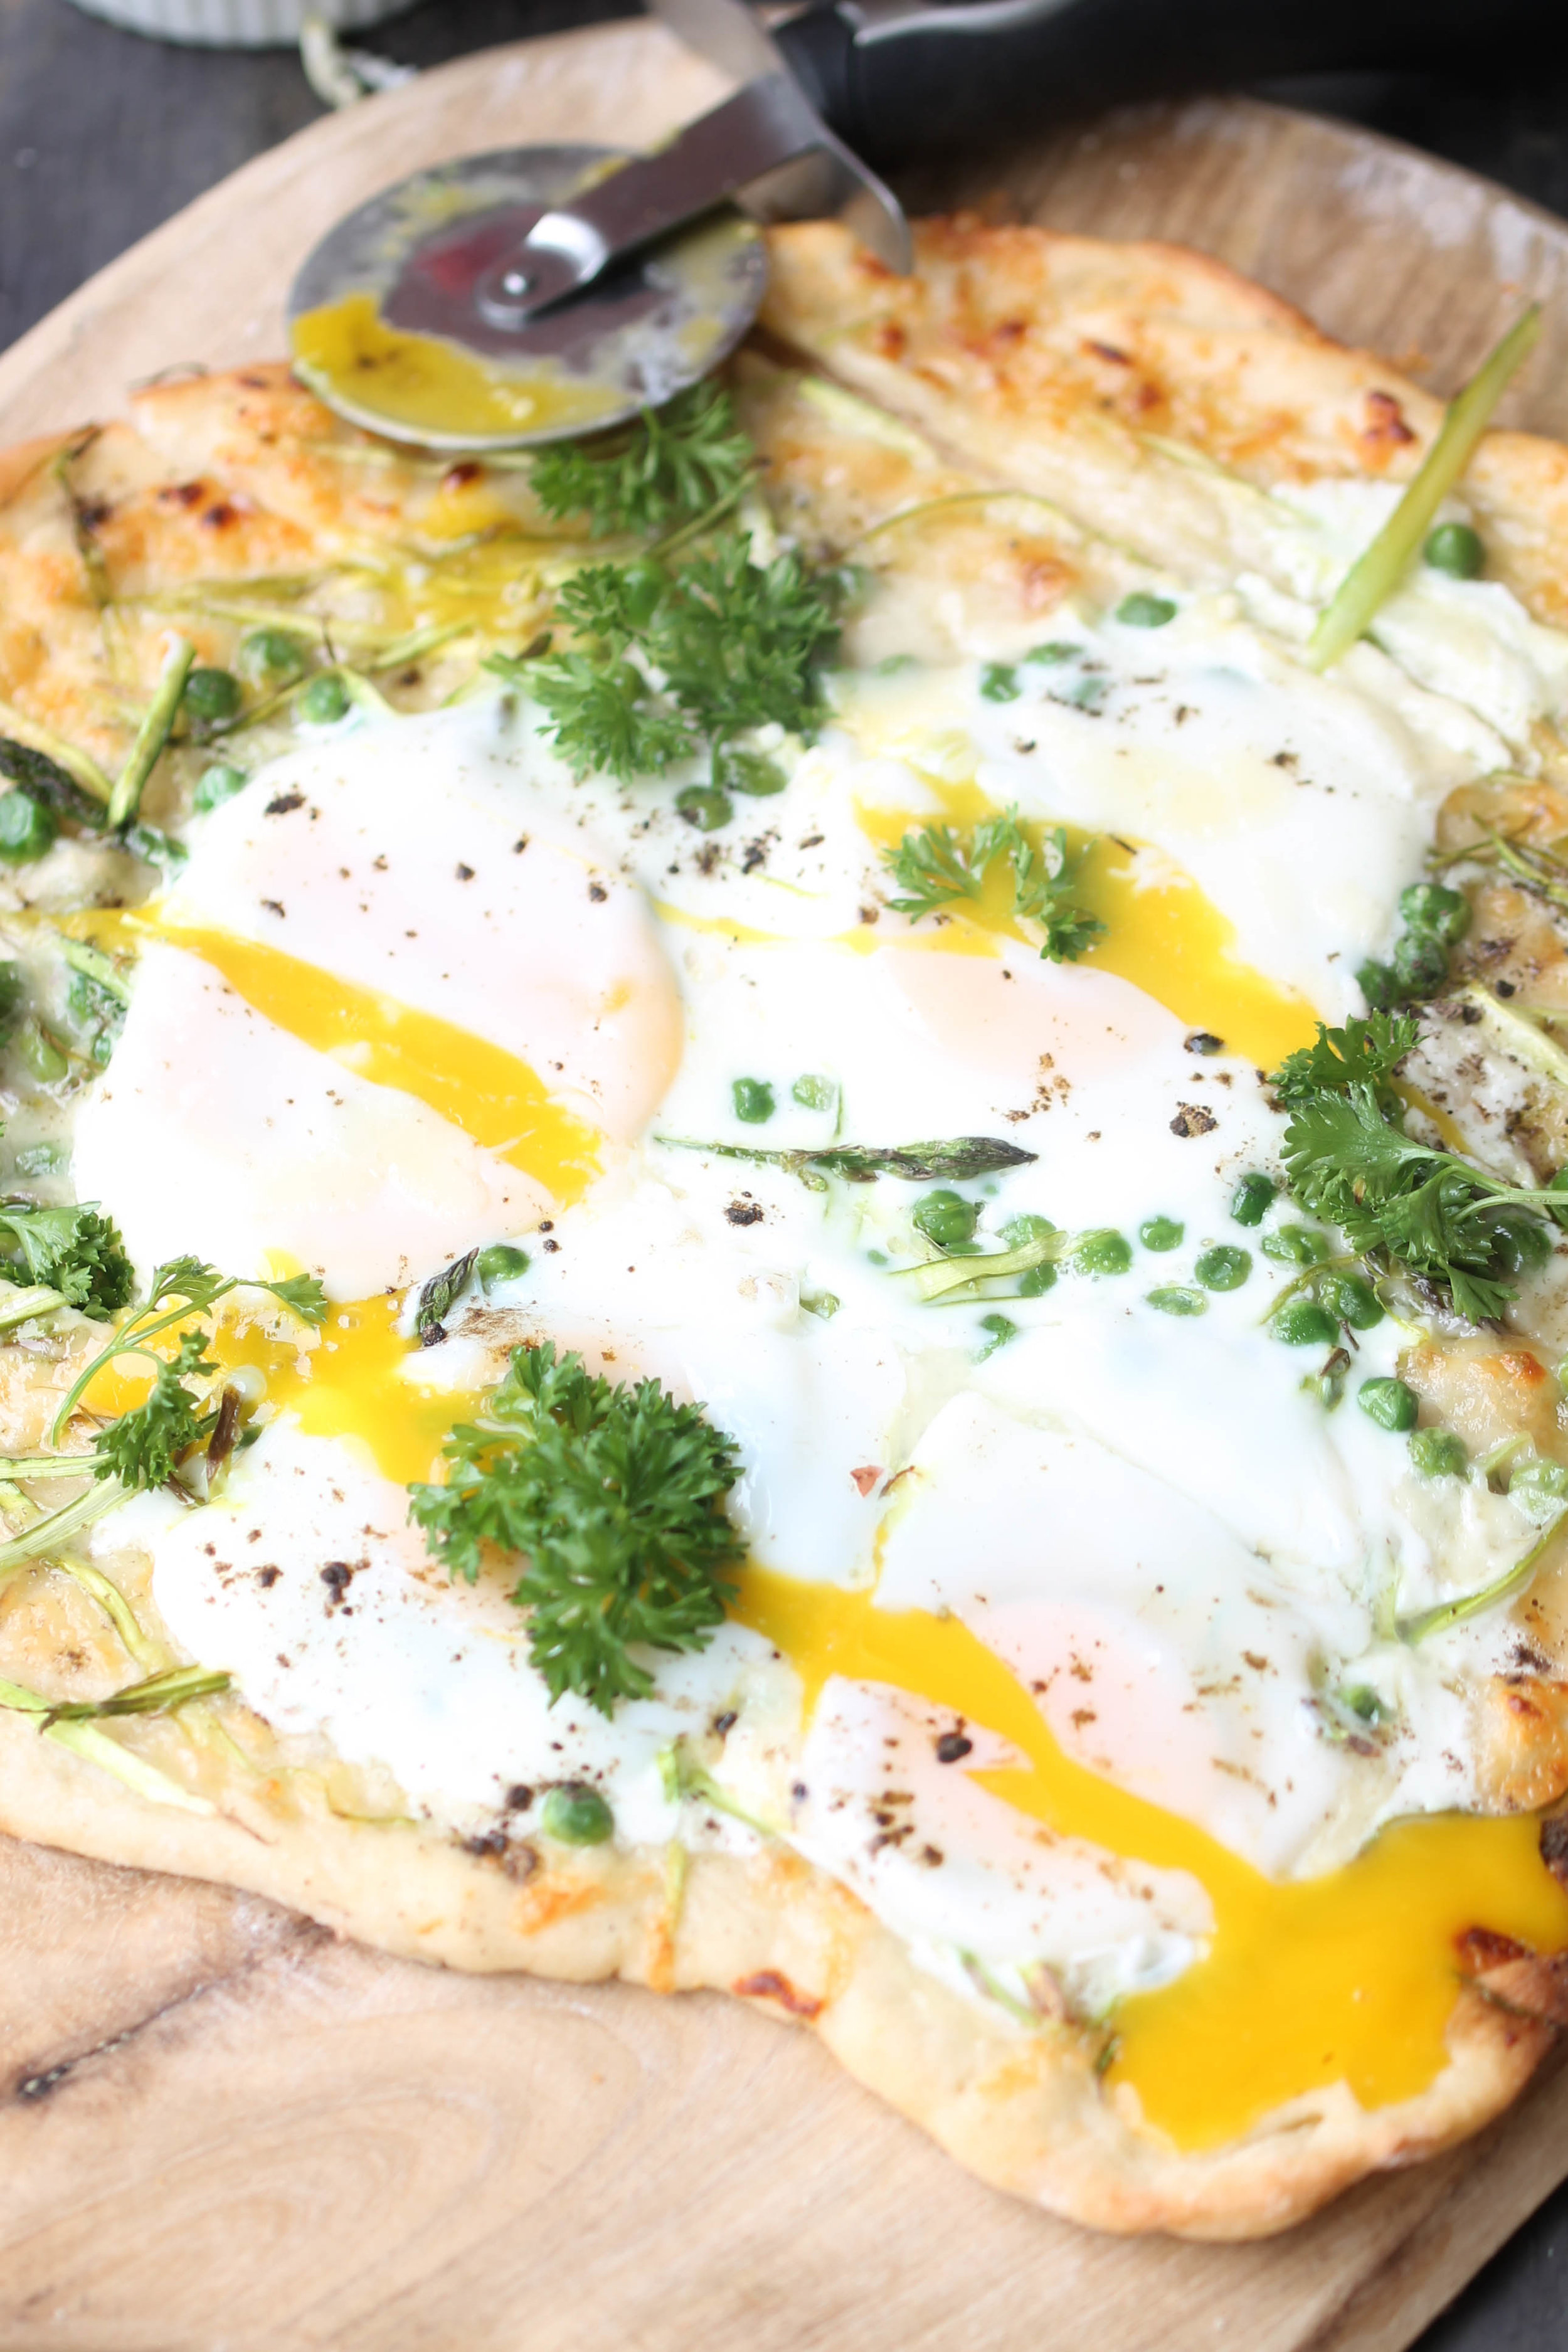 Switch up your brunch game with Spring Brunch Pizza! Simple ingredients, flexible, and enjoyed by everyone.